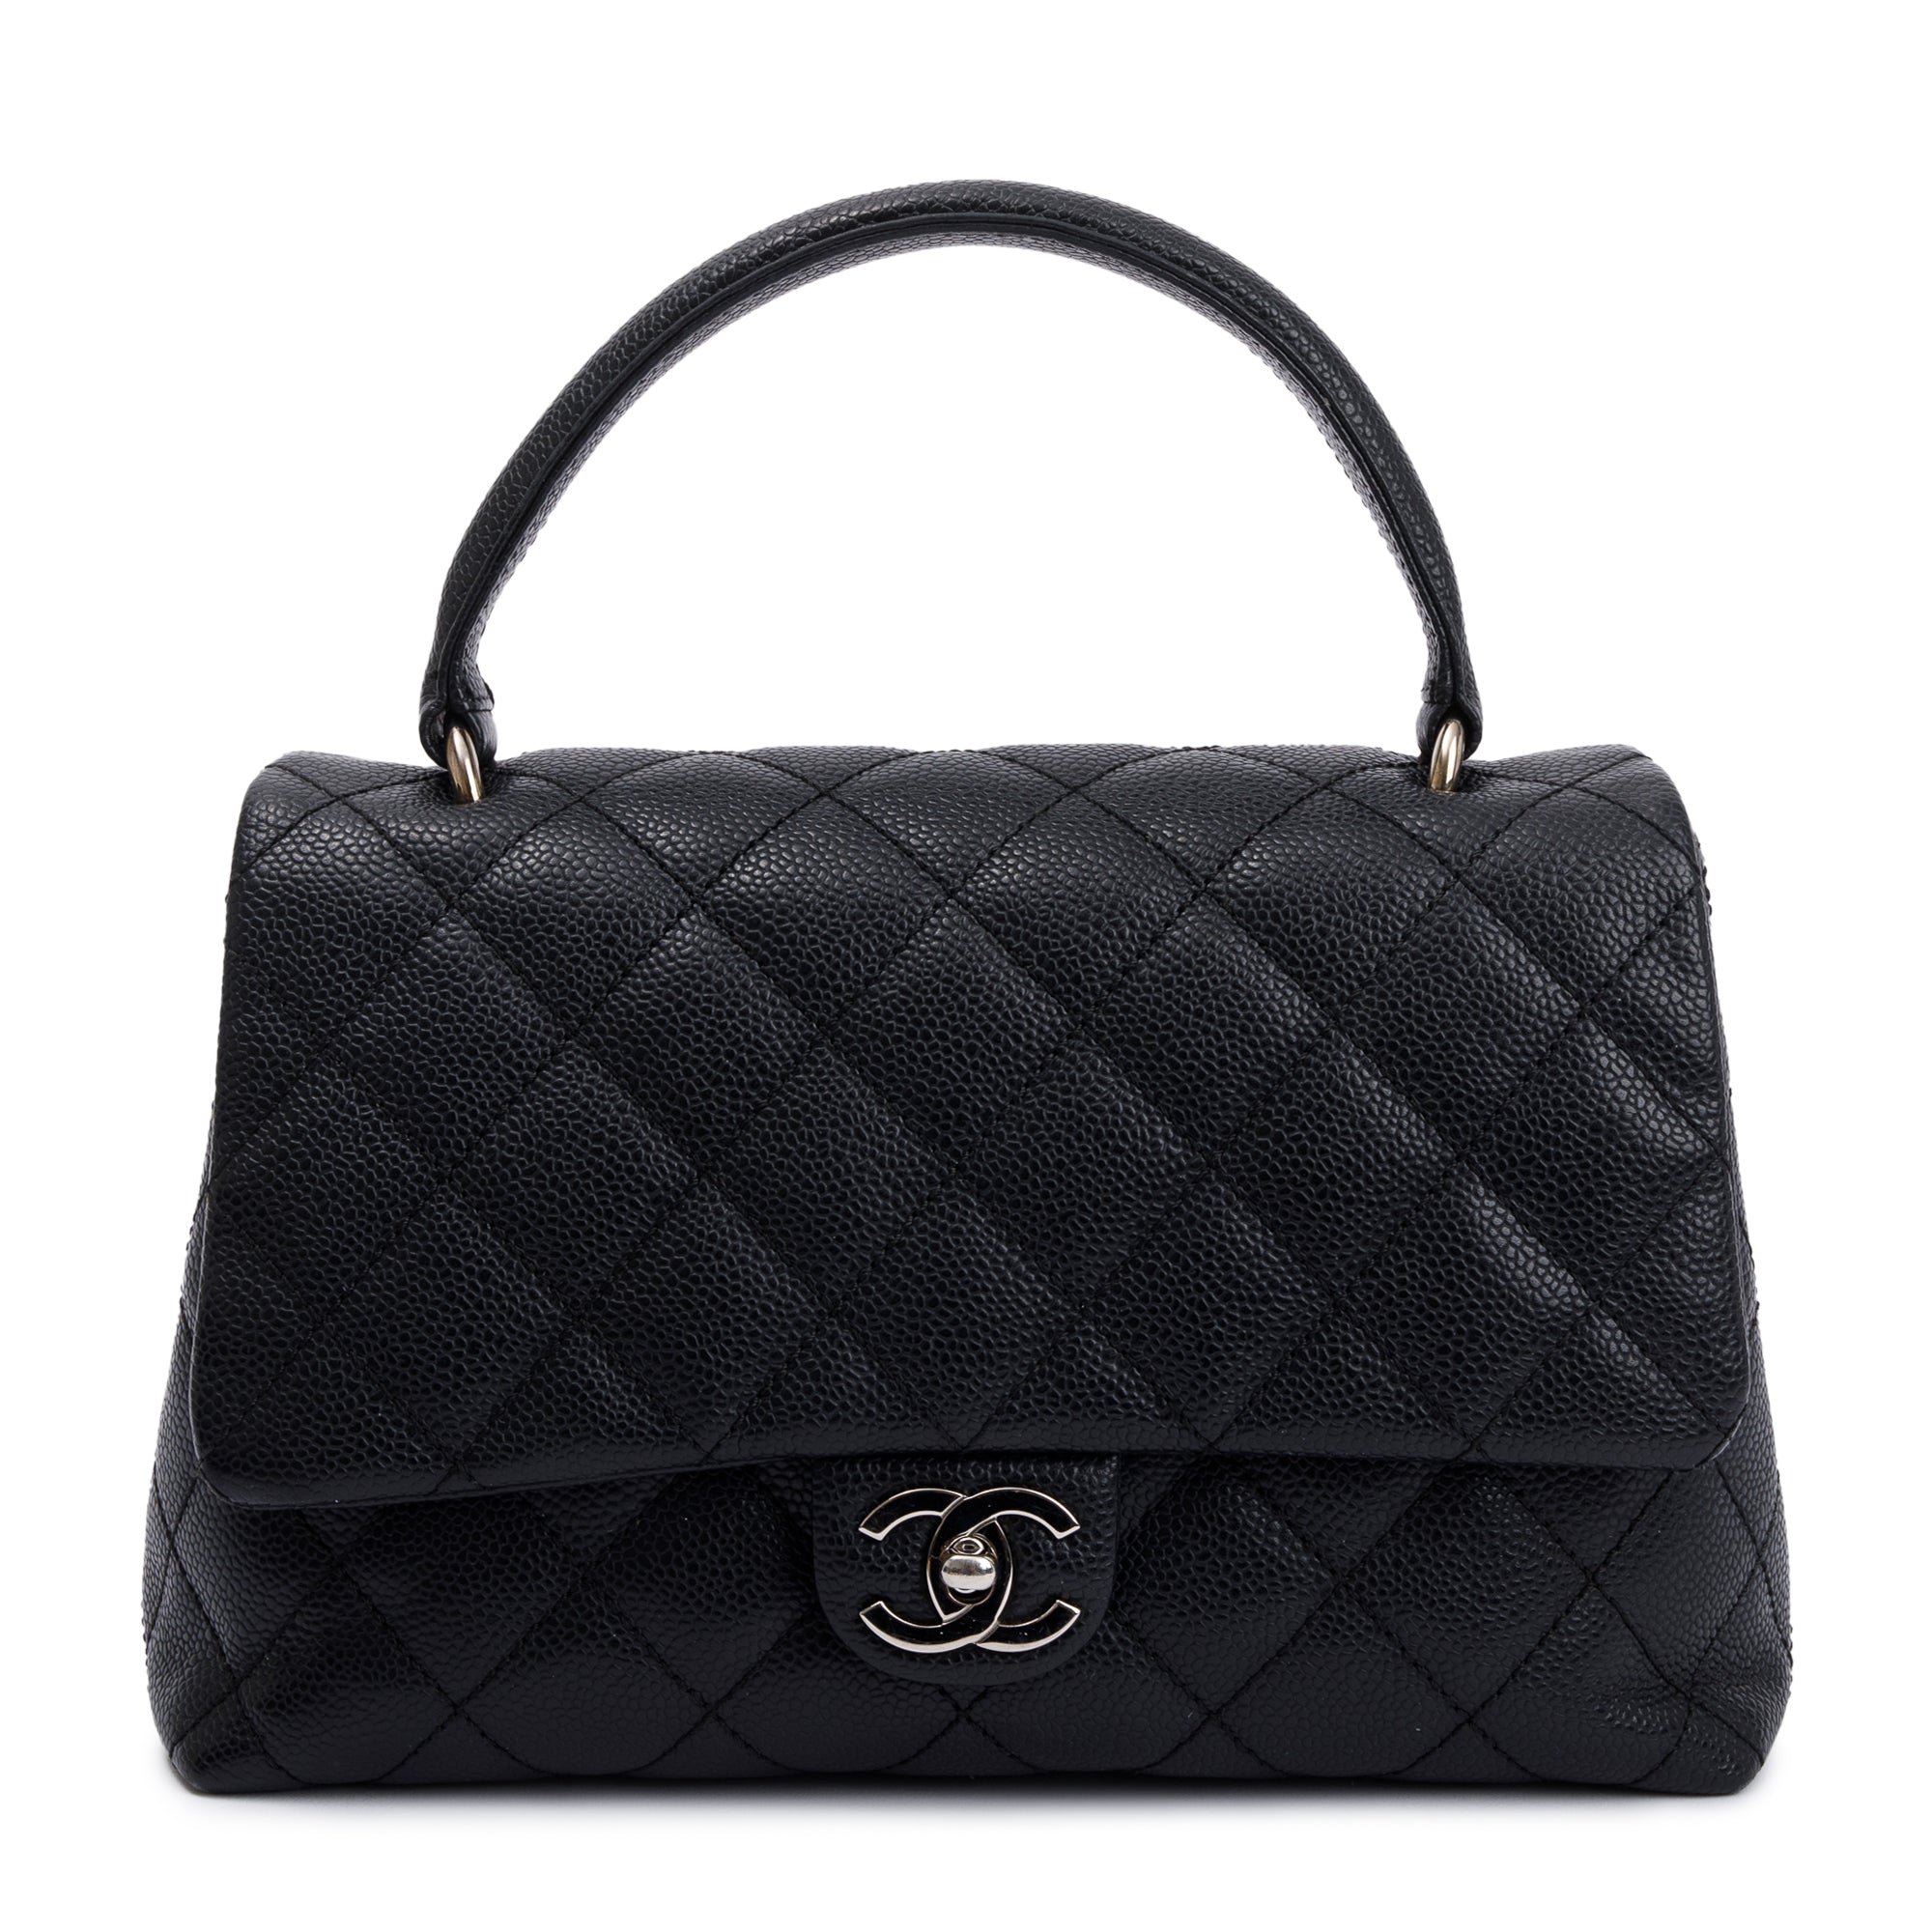 Chanel Black Quilted Caviar Leather Medium Kelly Top Handle Bag w/ Box